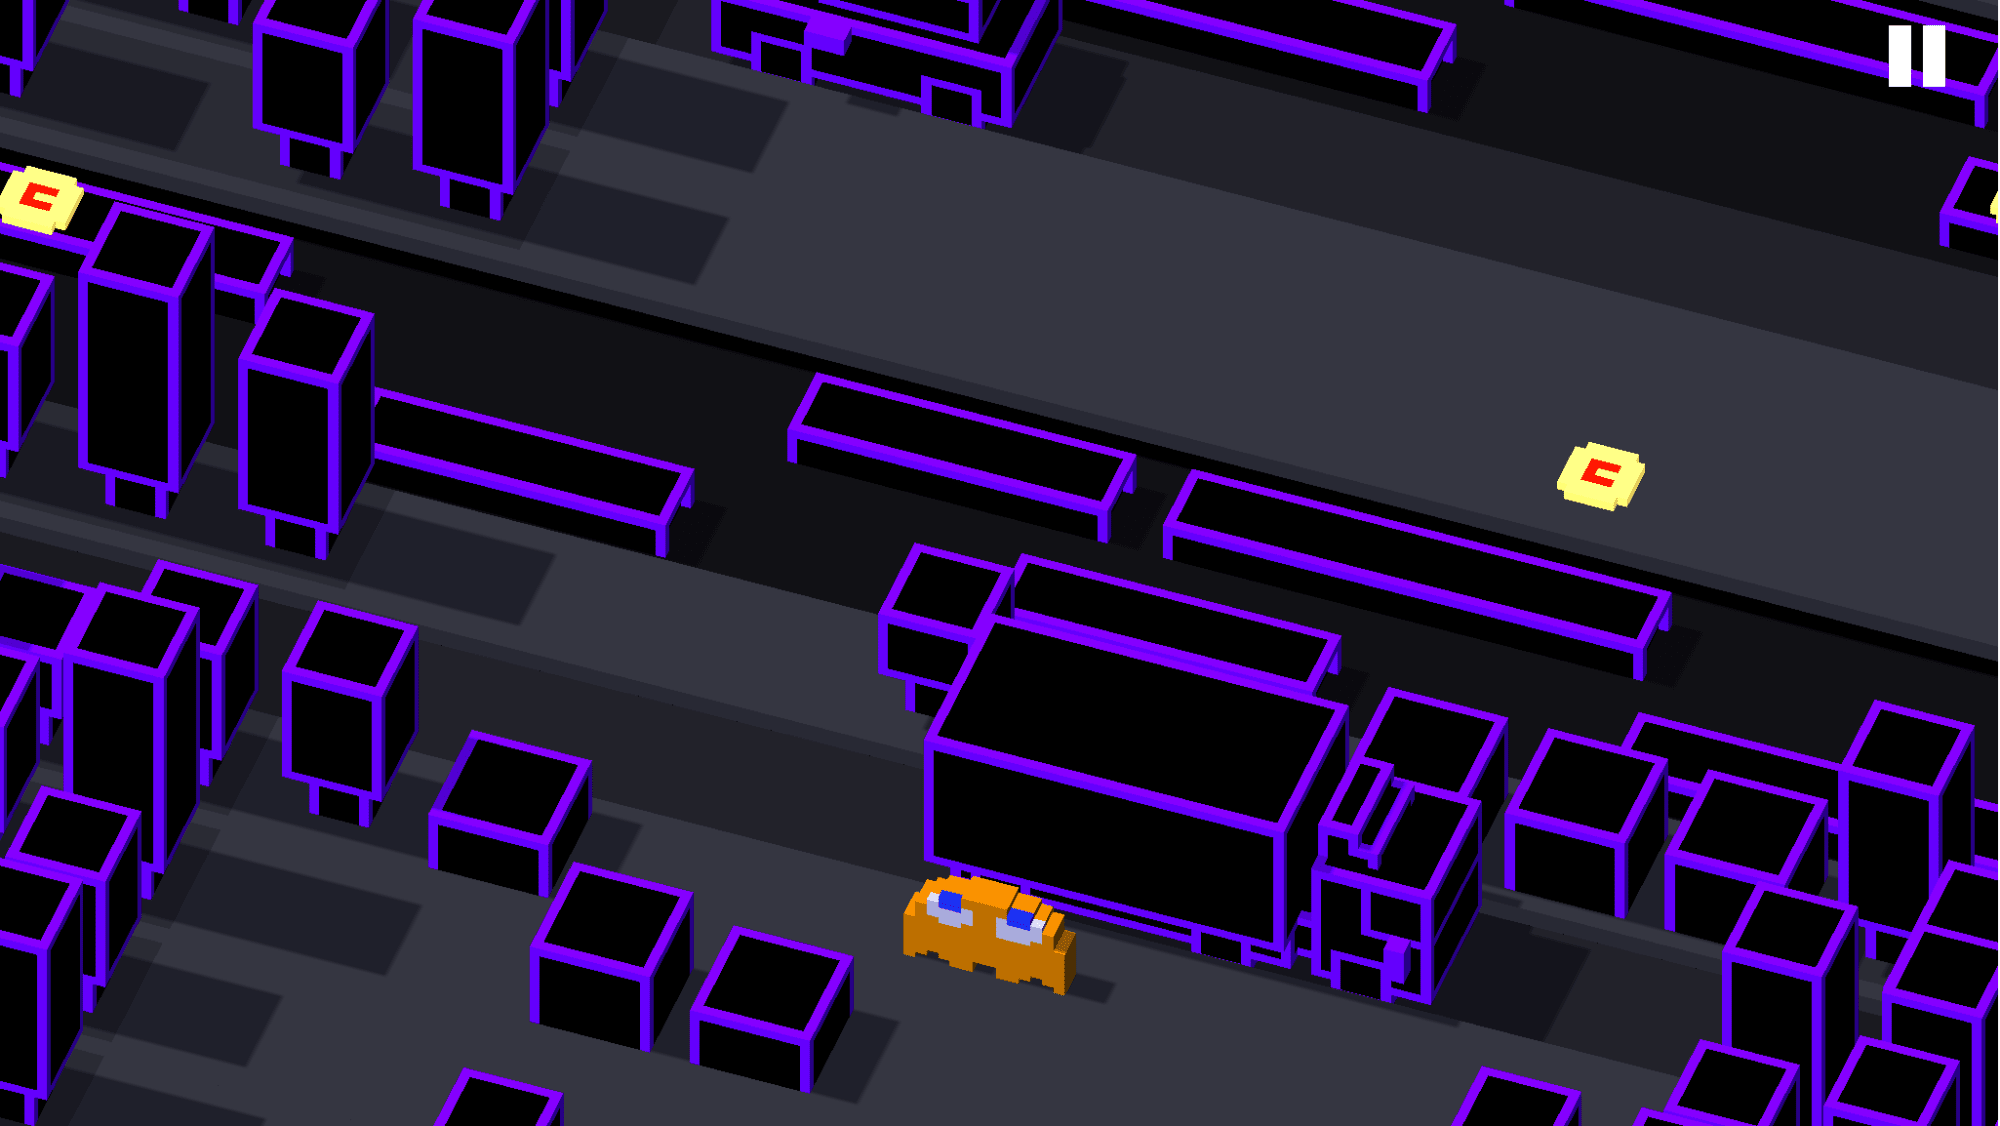 how to get pac man ghosts in crossy road